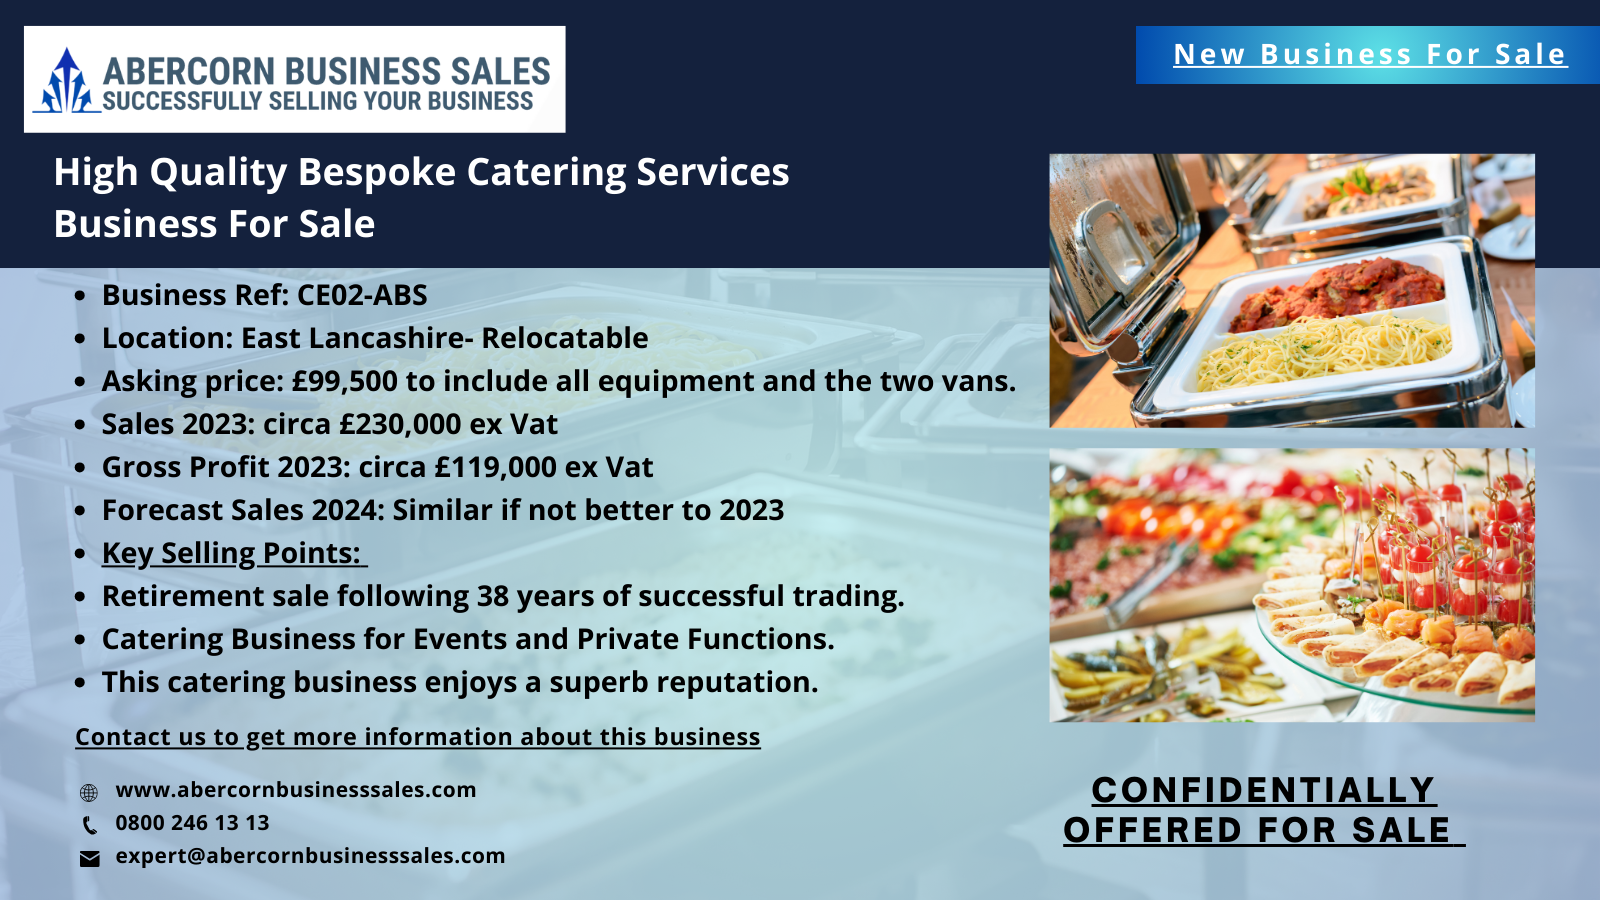 CE02-ABS - High Quality Bespoke Catering Services Business For Sale